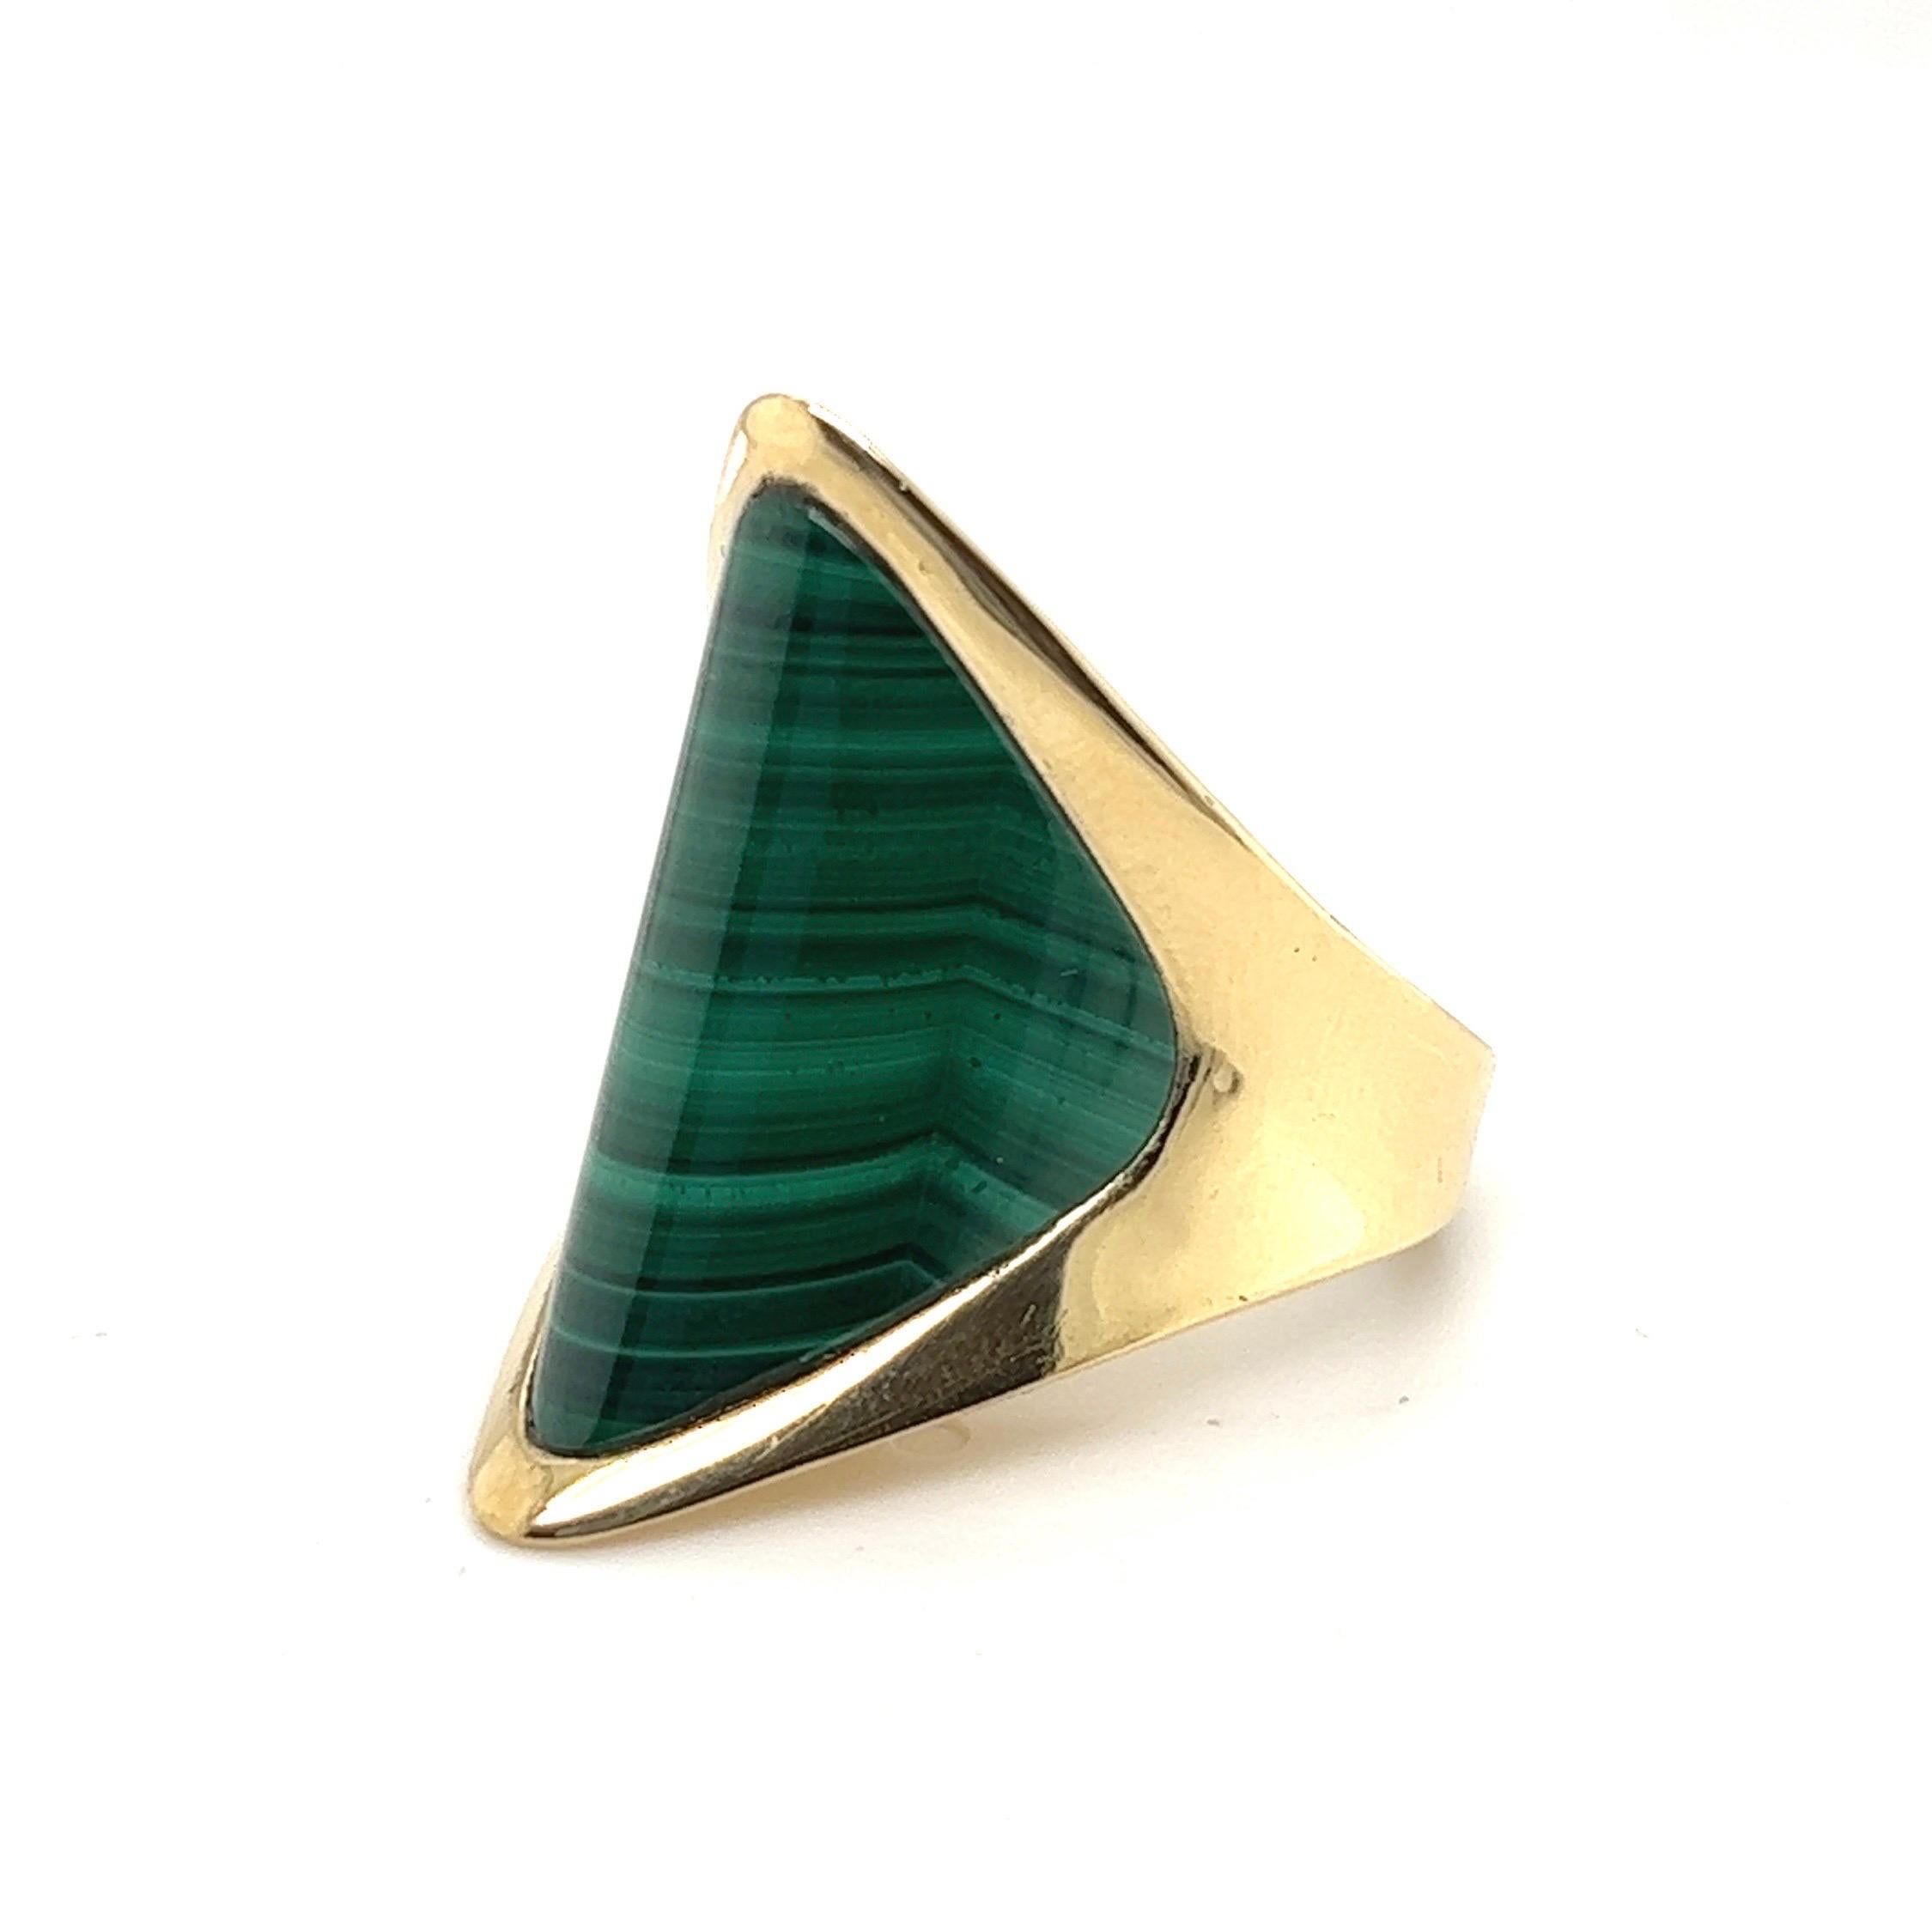 Mixed Cut Piaget 18 Karat Yellow Gold and Malachite Cocktail Ring, circa 1970s For Sale